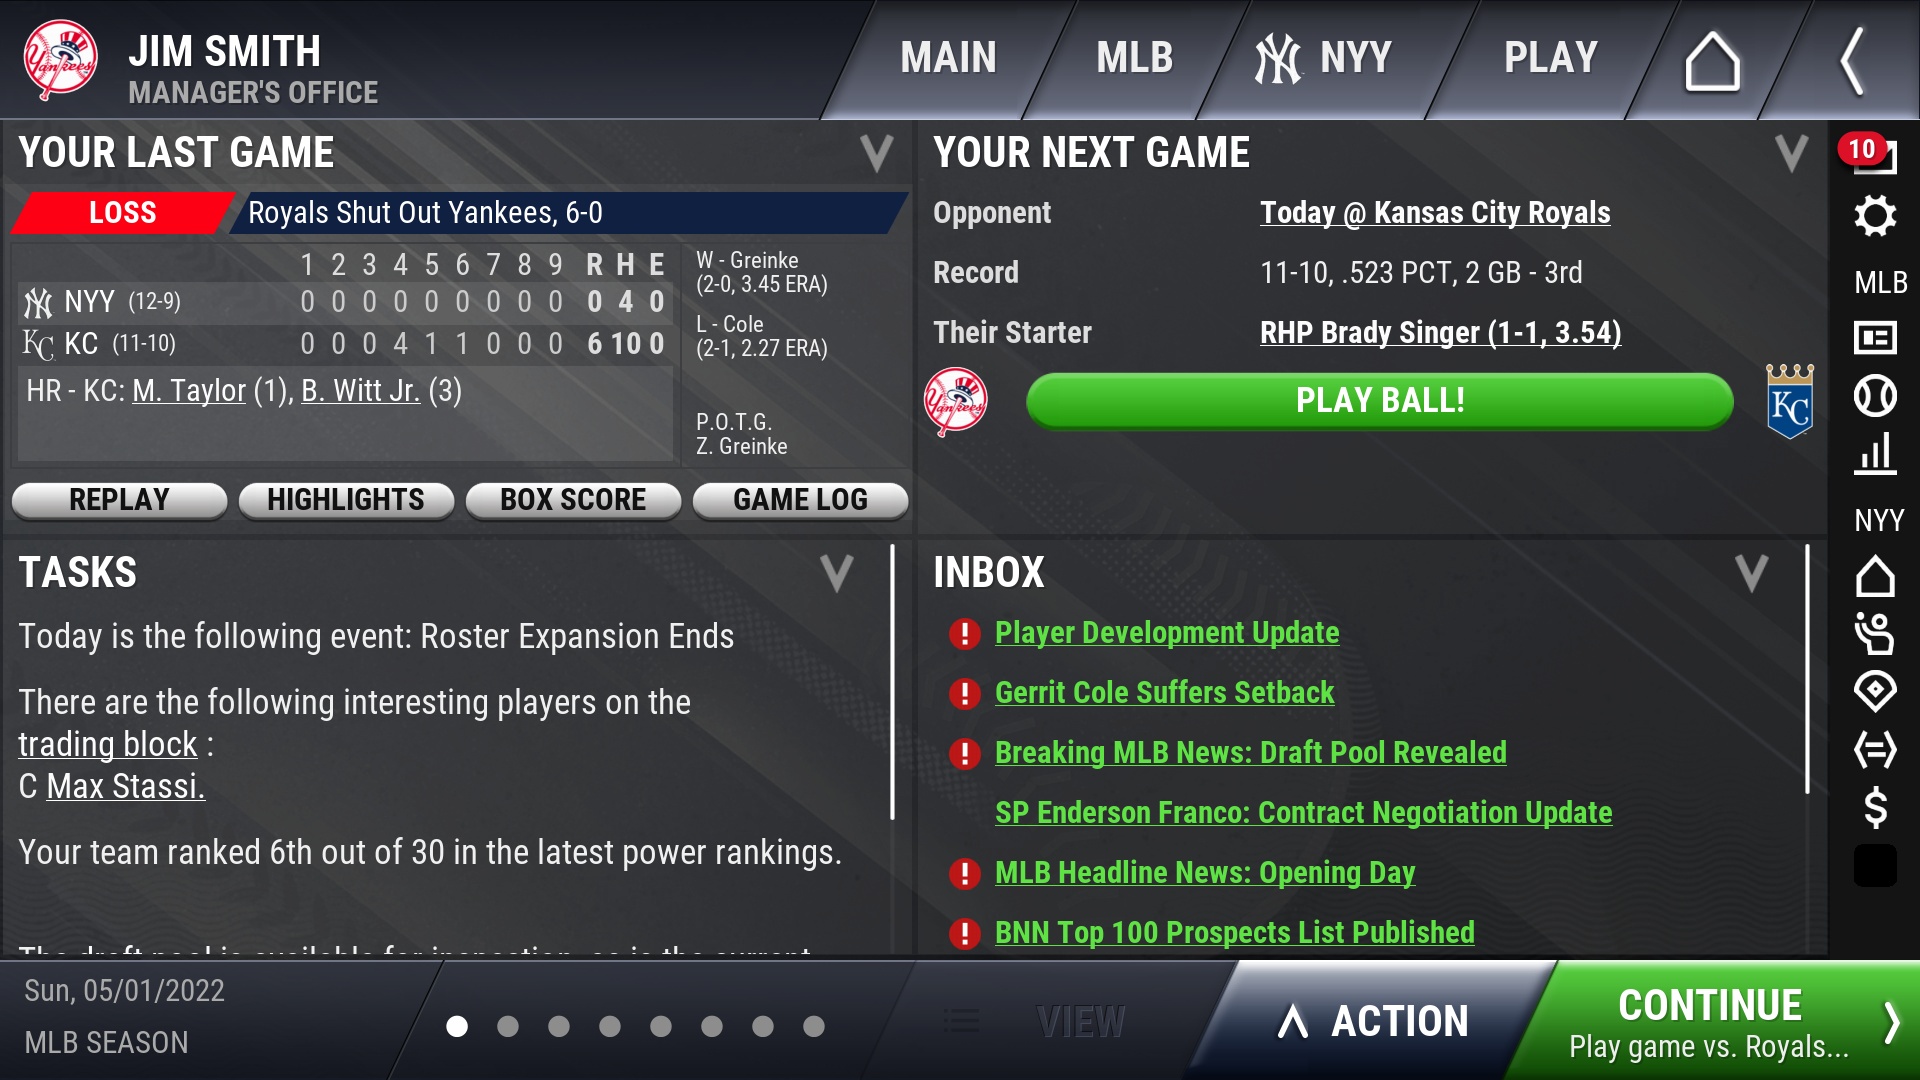 OOTP Baseball Go 23 Available For iOS and Android Devices